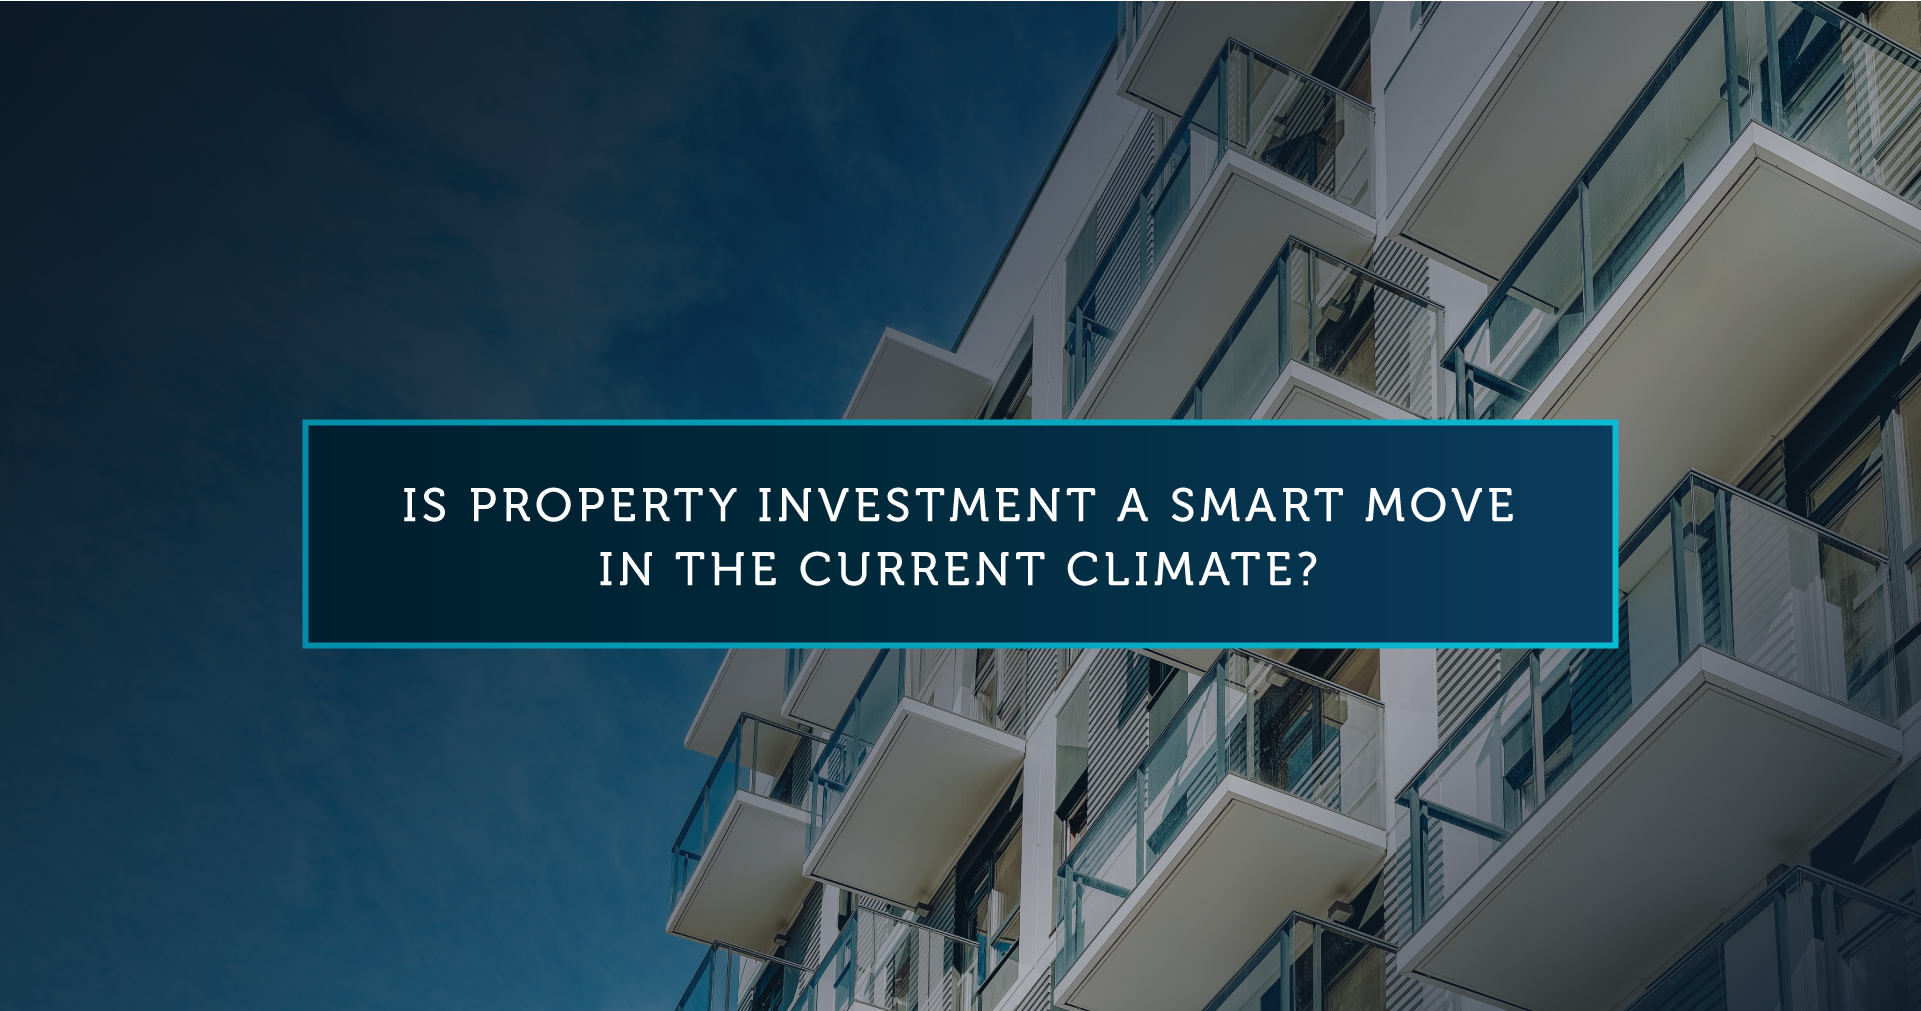 Is property investment a smart move in the current climate?